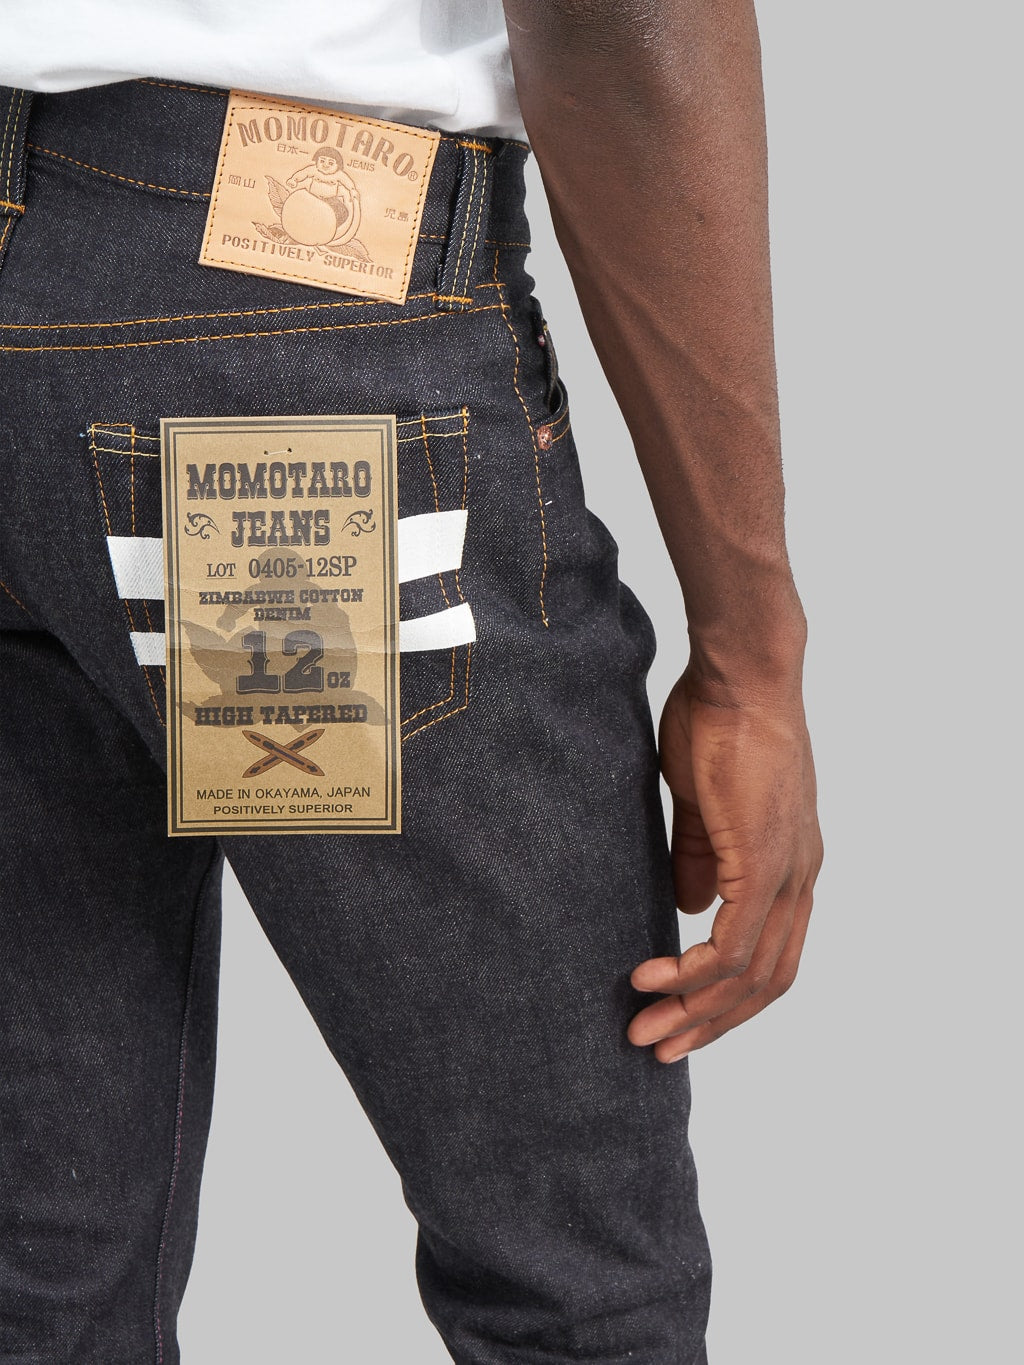 Momotaro 0405 12 going to batle 12oz high Tapered Jeans pocket lines